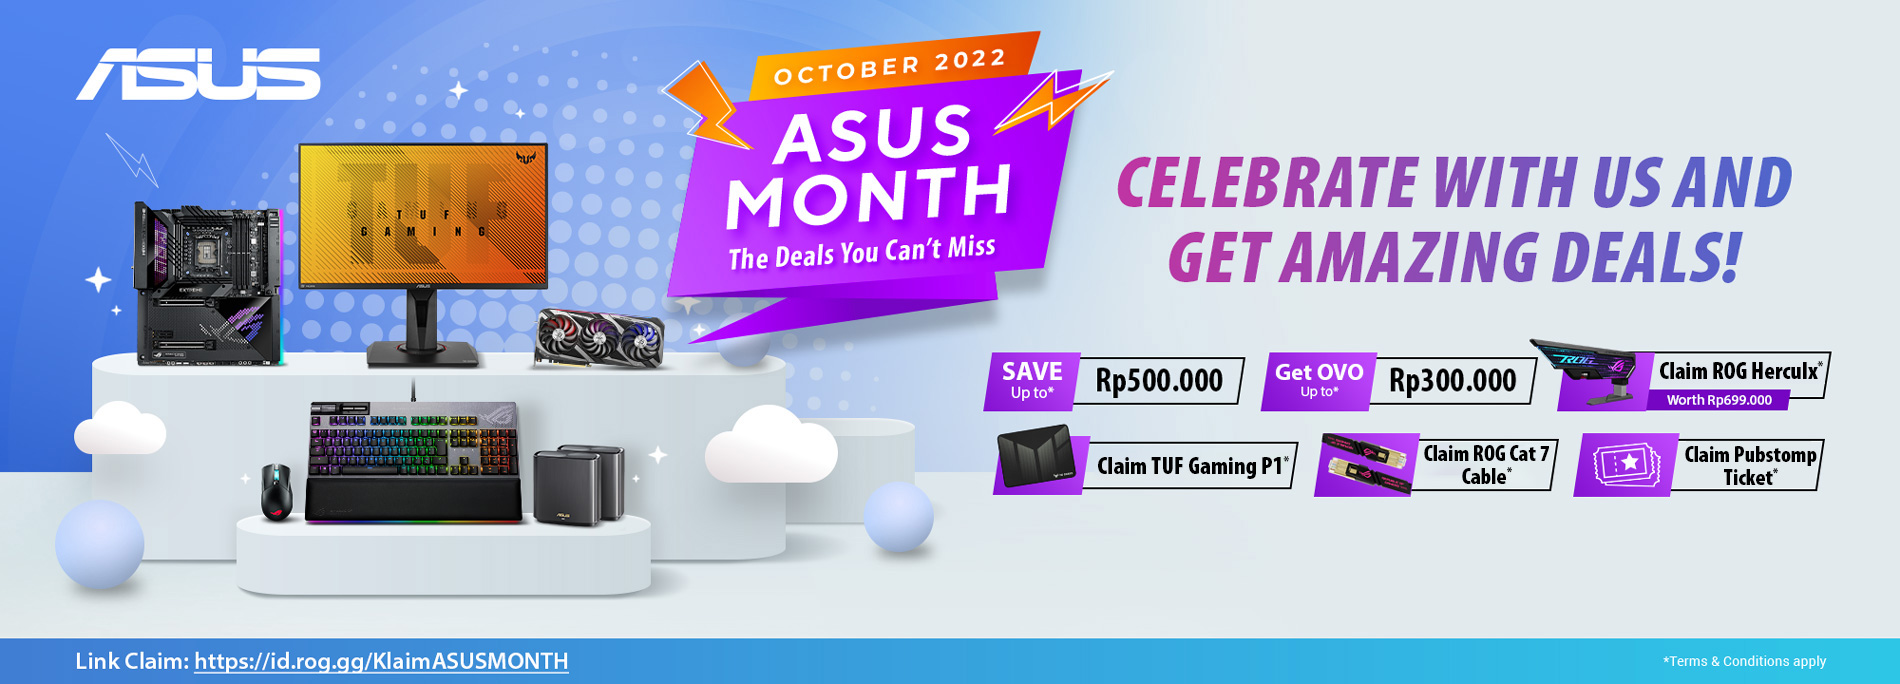 ASUS MONTH - OCTOBER PROMOTION 01-31 October 2022 (2)